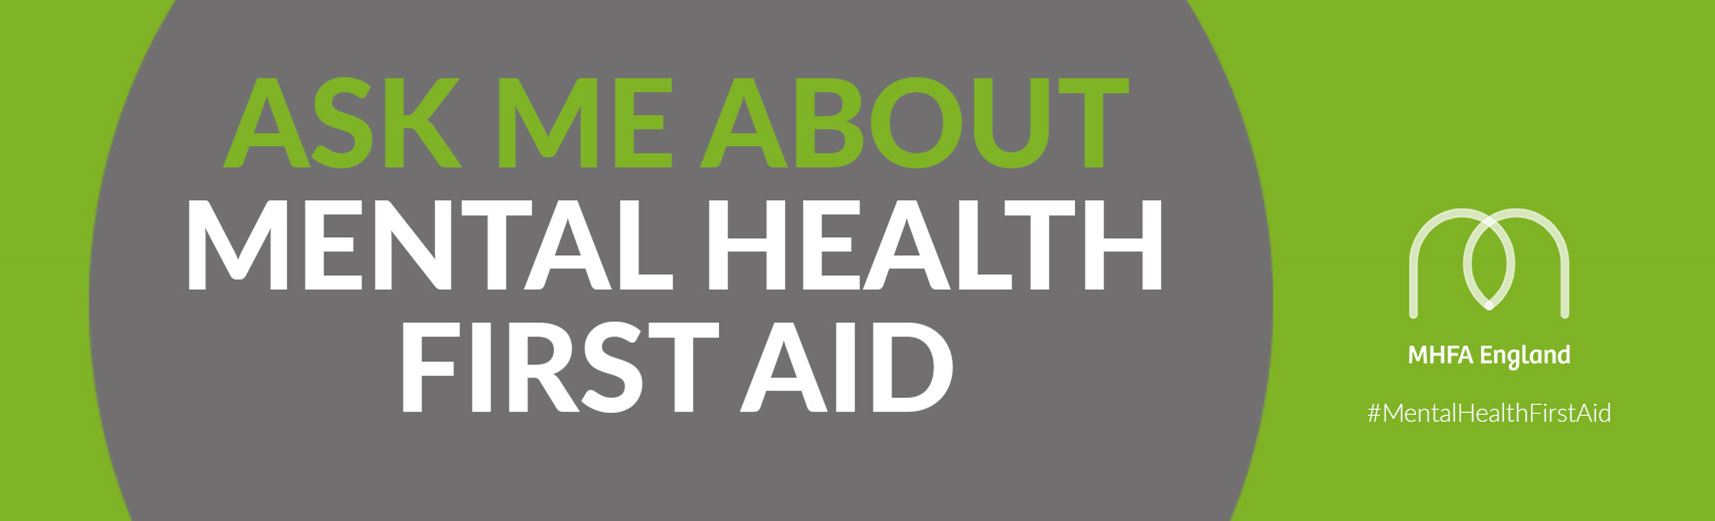 ask me about mental health first aid for staff